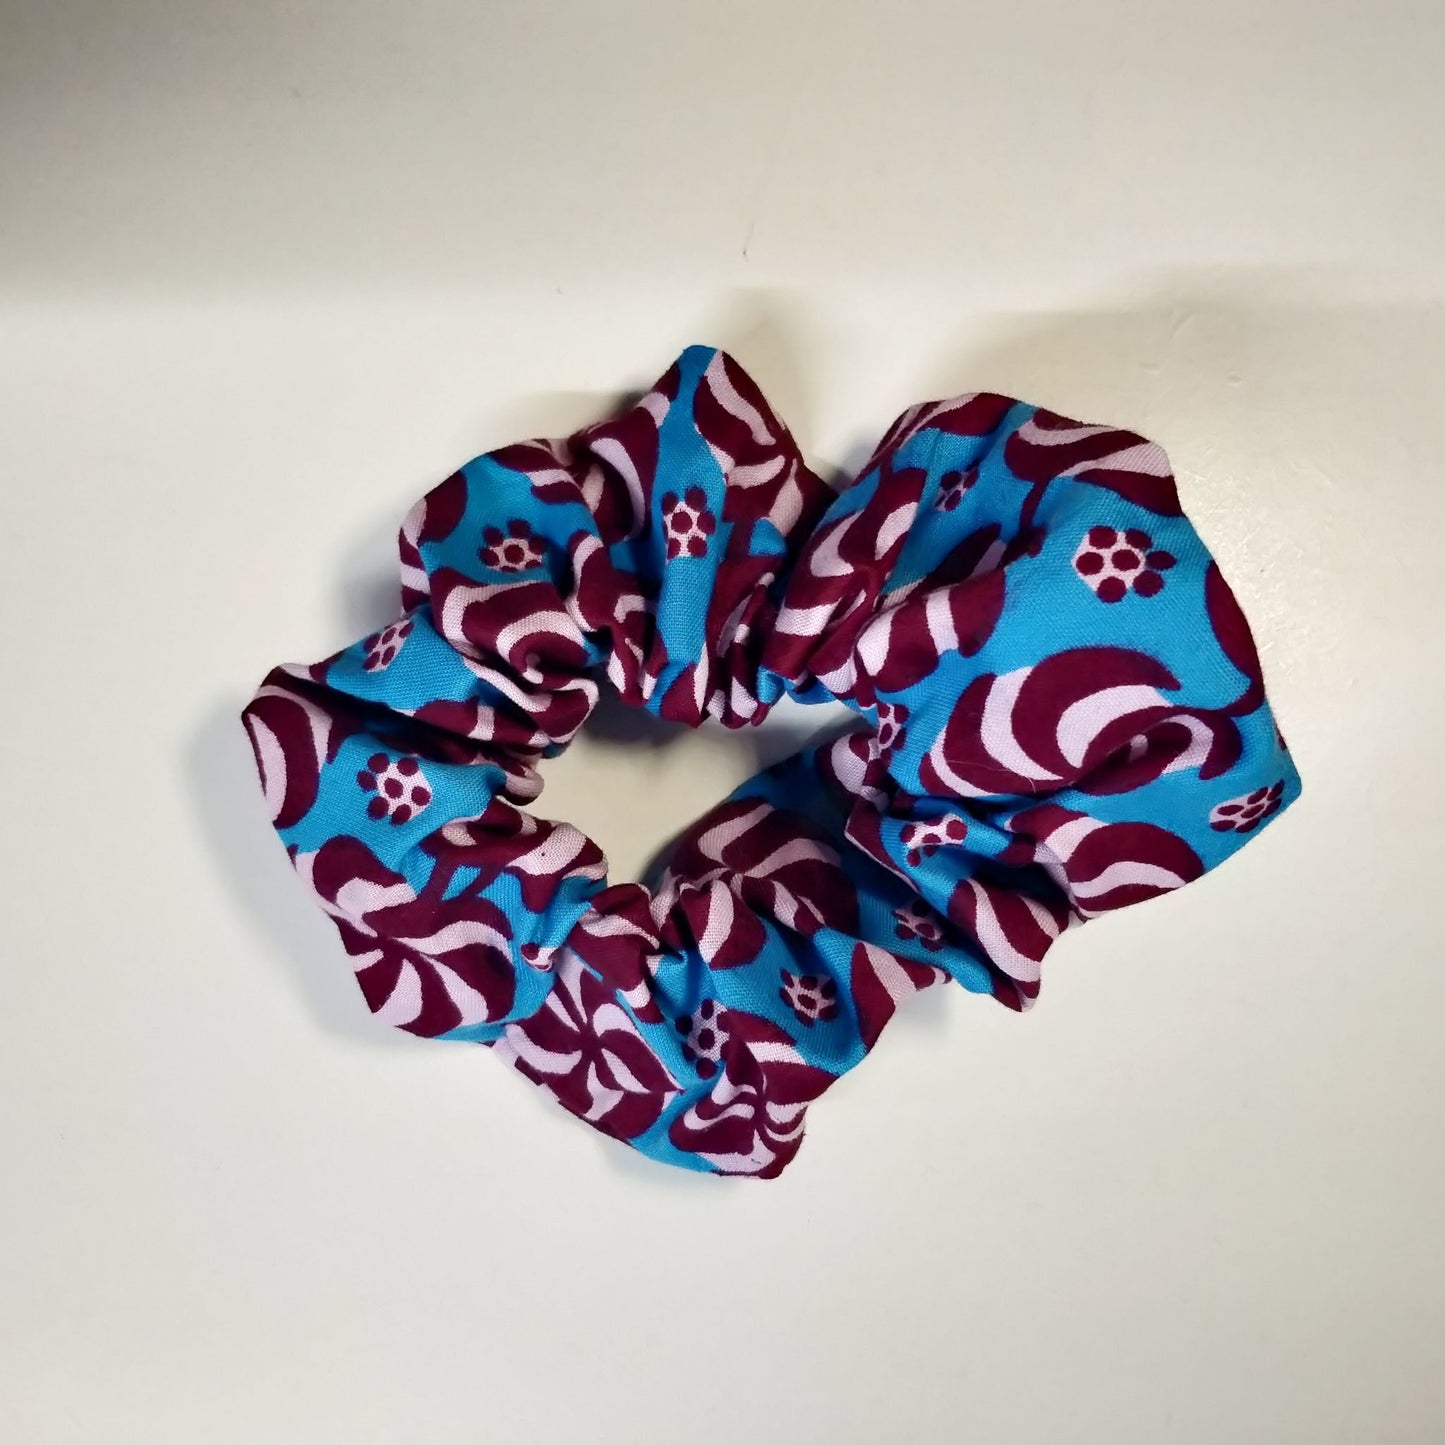 Colourful Scrunchies Changing Lives  Ethical Cotton - lollipop